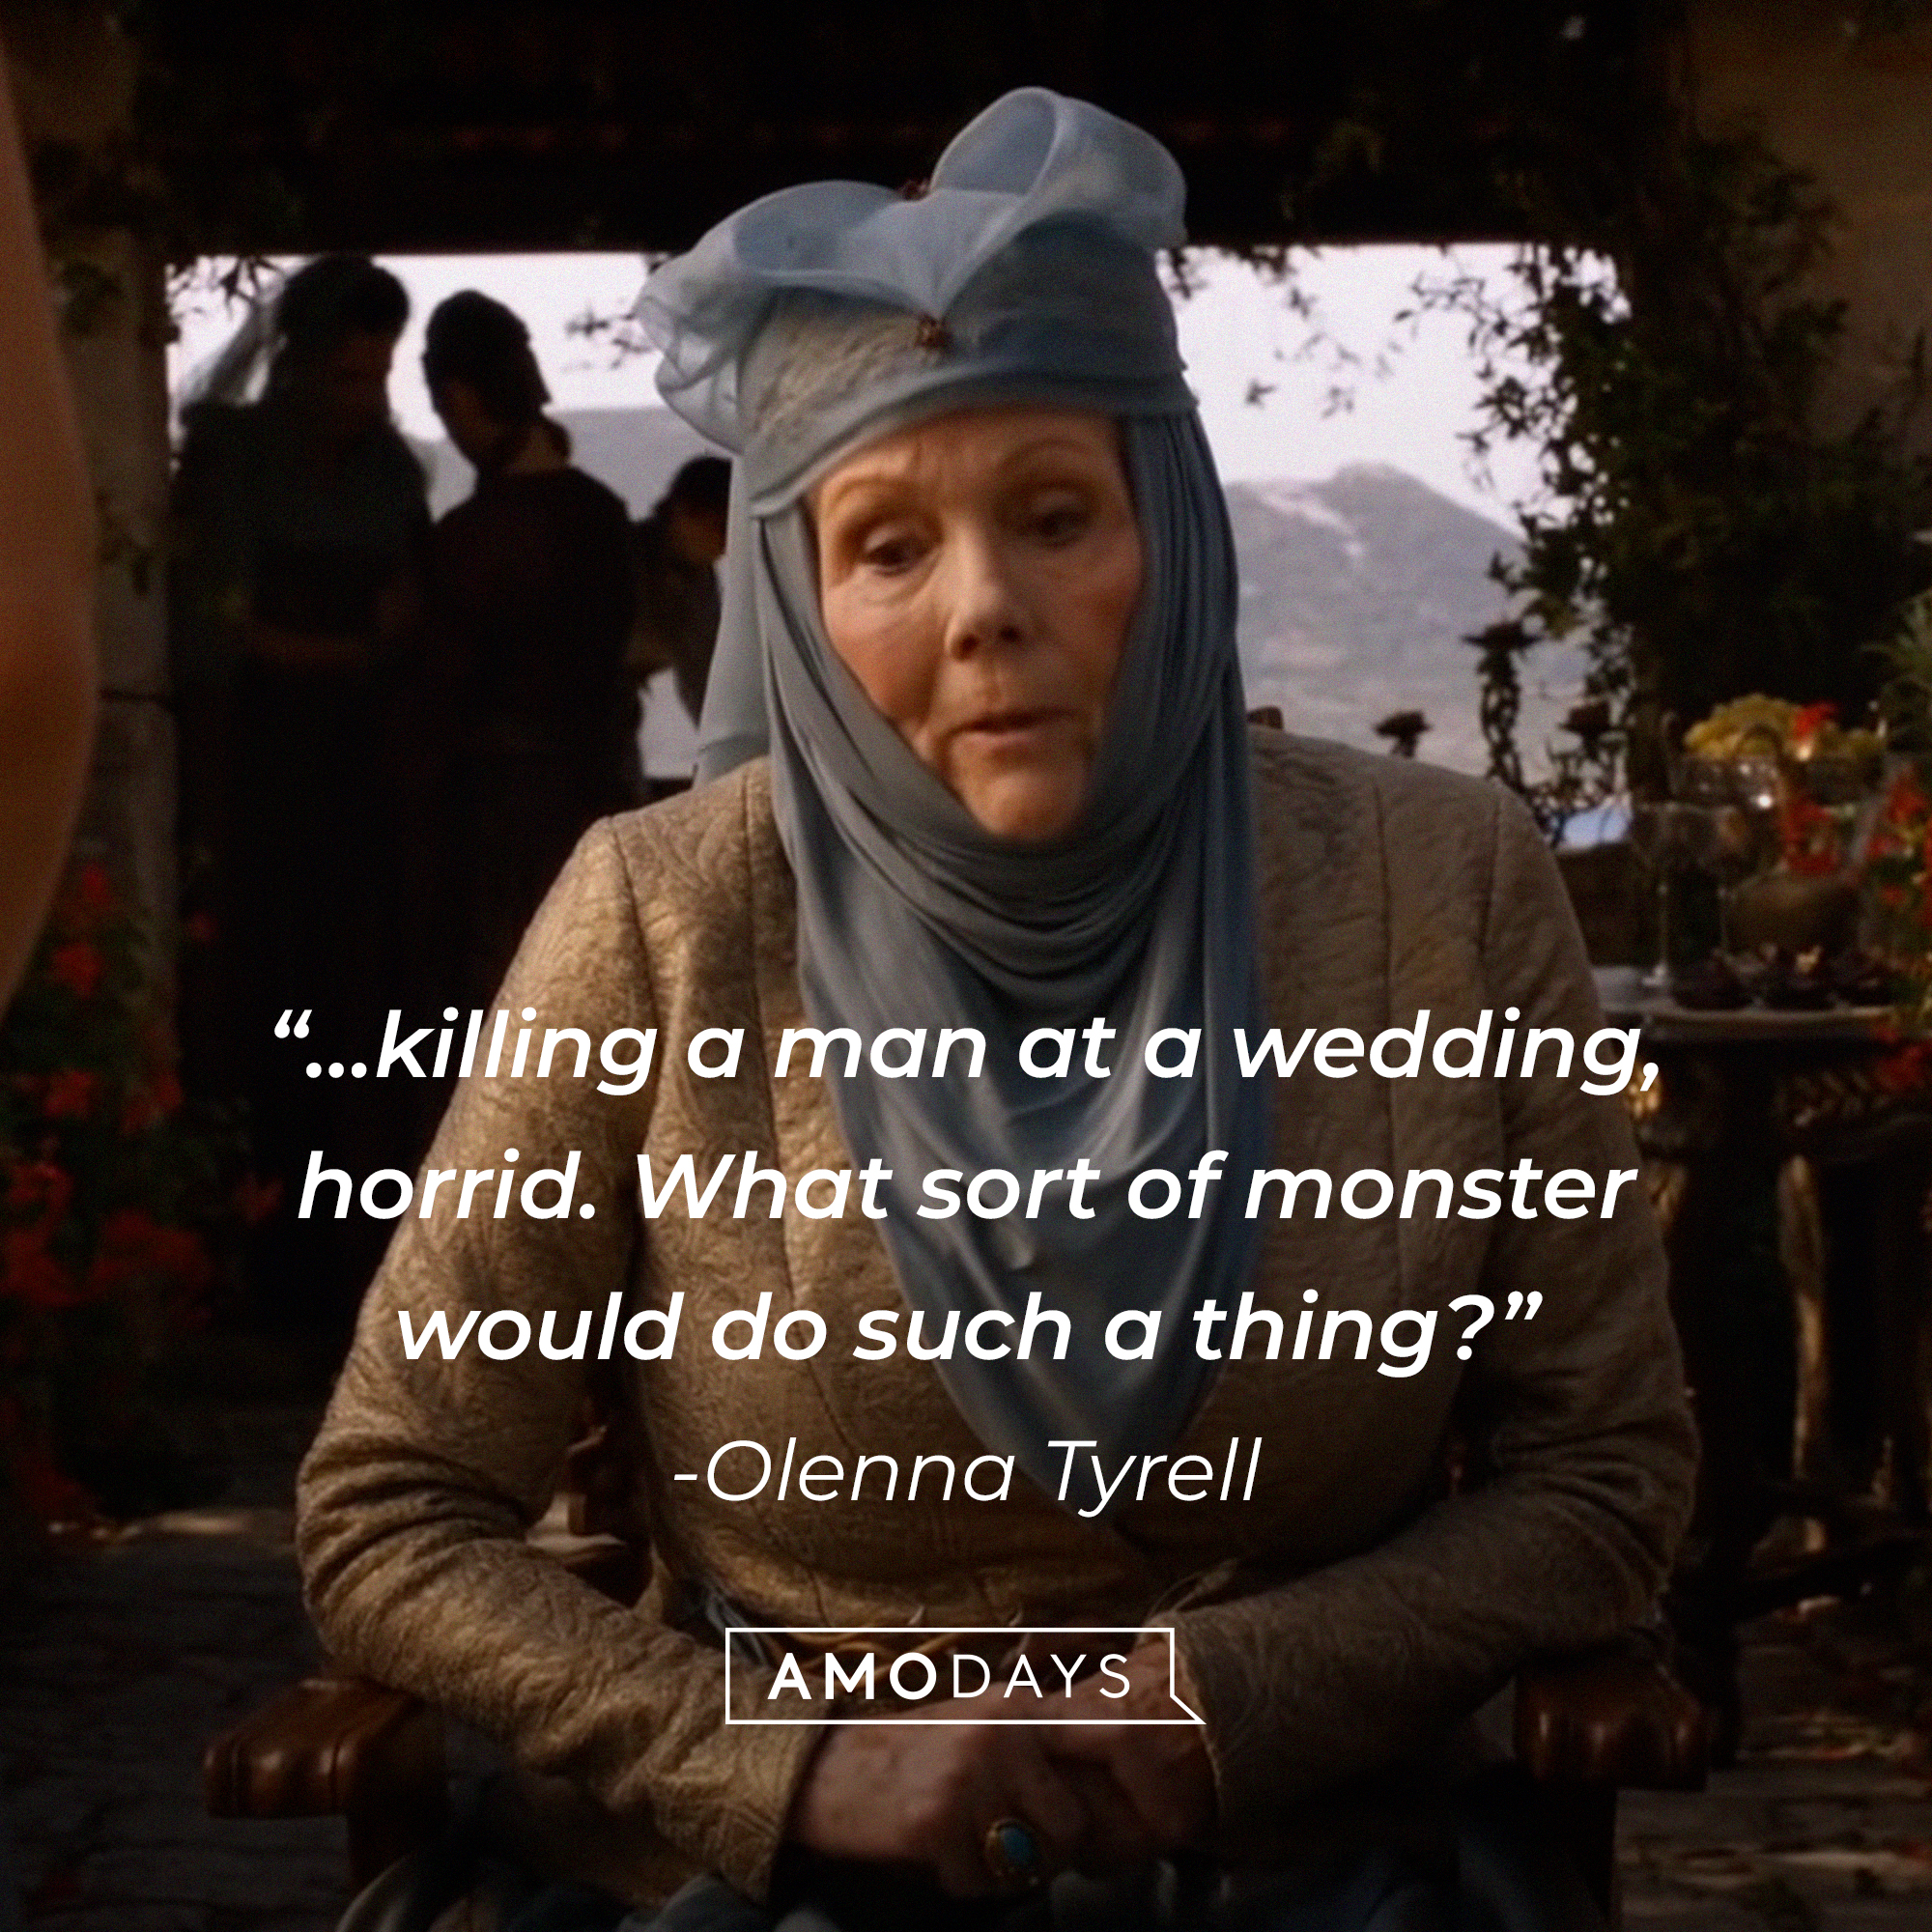 Olenna Tyrell, with her quote: “…killing a man at a wedding, horrid. What sort of monster would do such a thing?" │ Source:  facebook.com/GameOfThrones